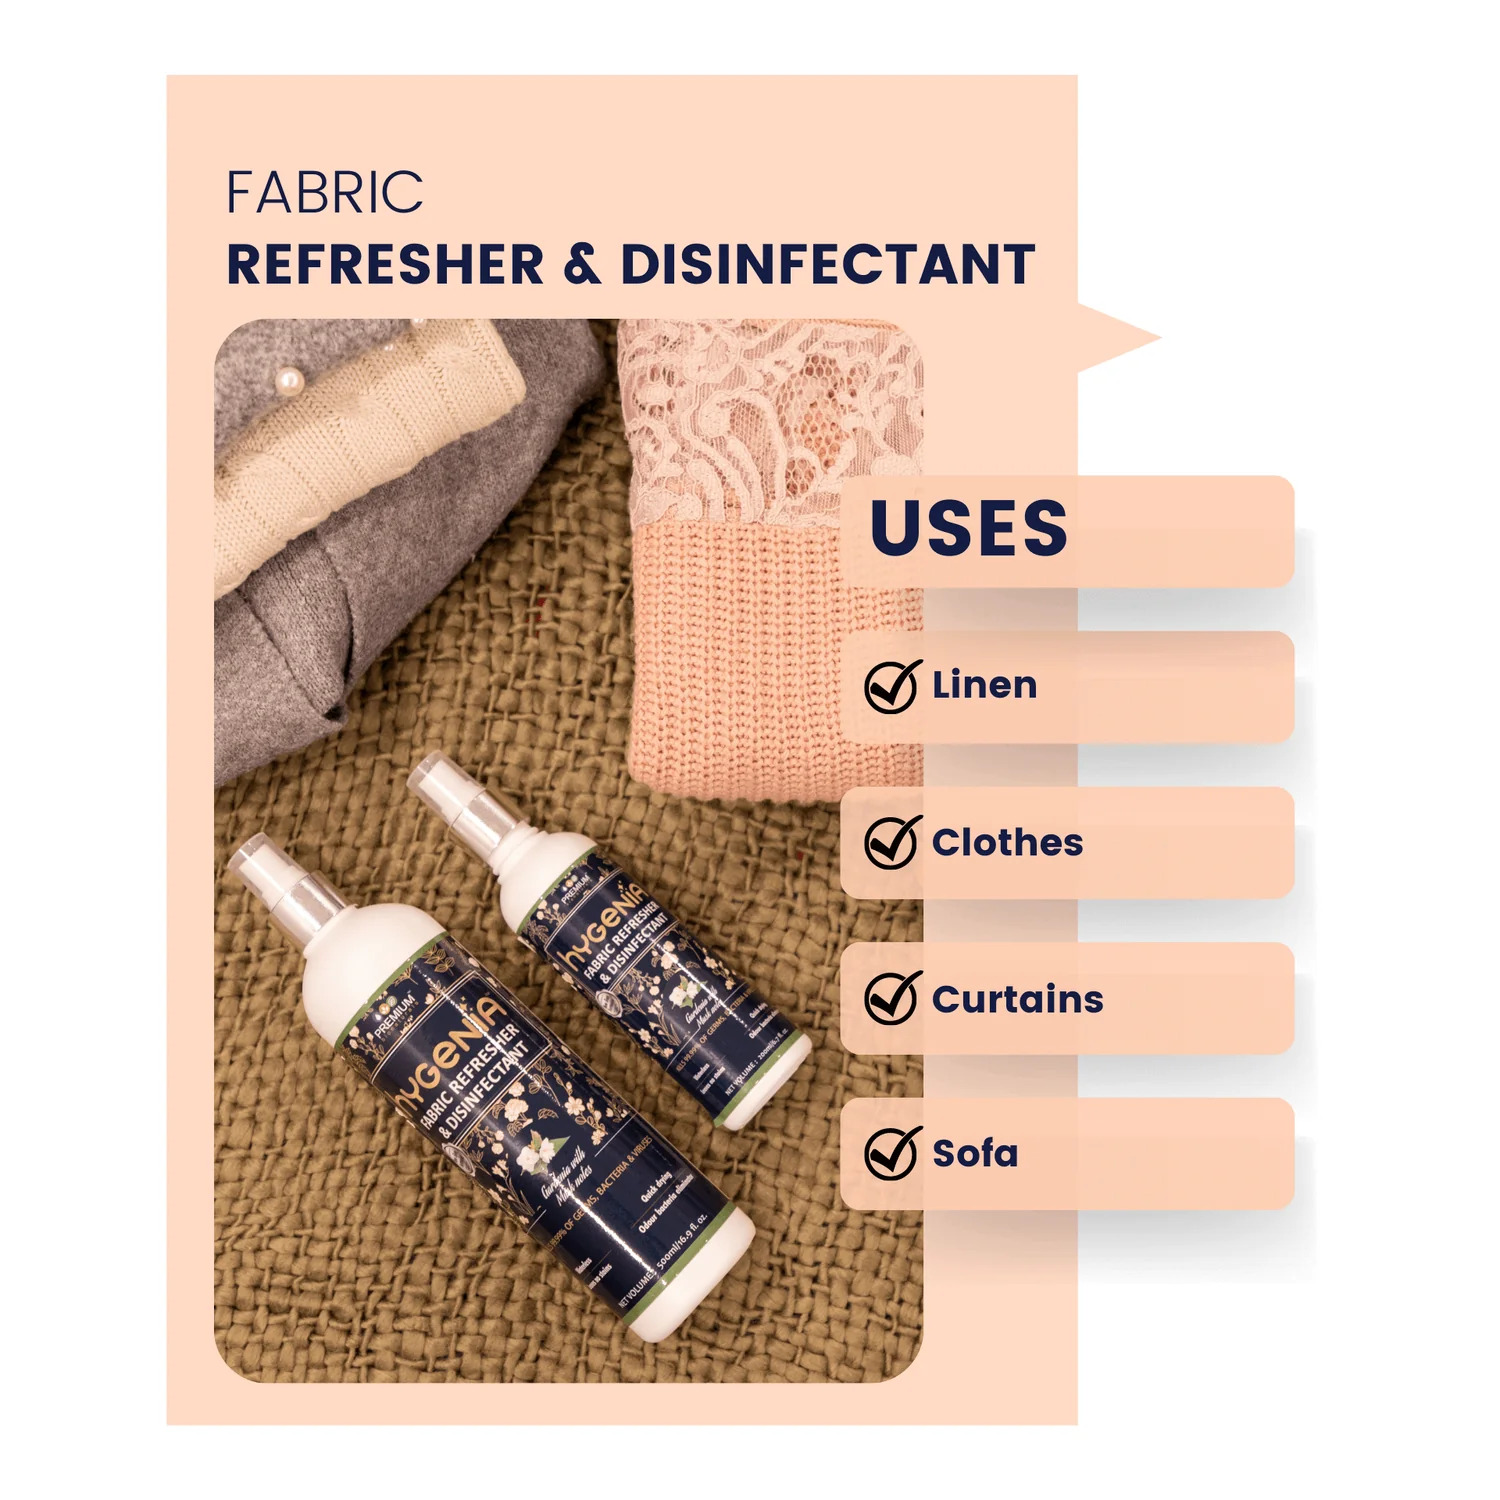 Hygenia Fabric Refresher & Disinfectant – Gardenia with Musk Notes